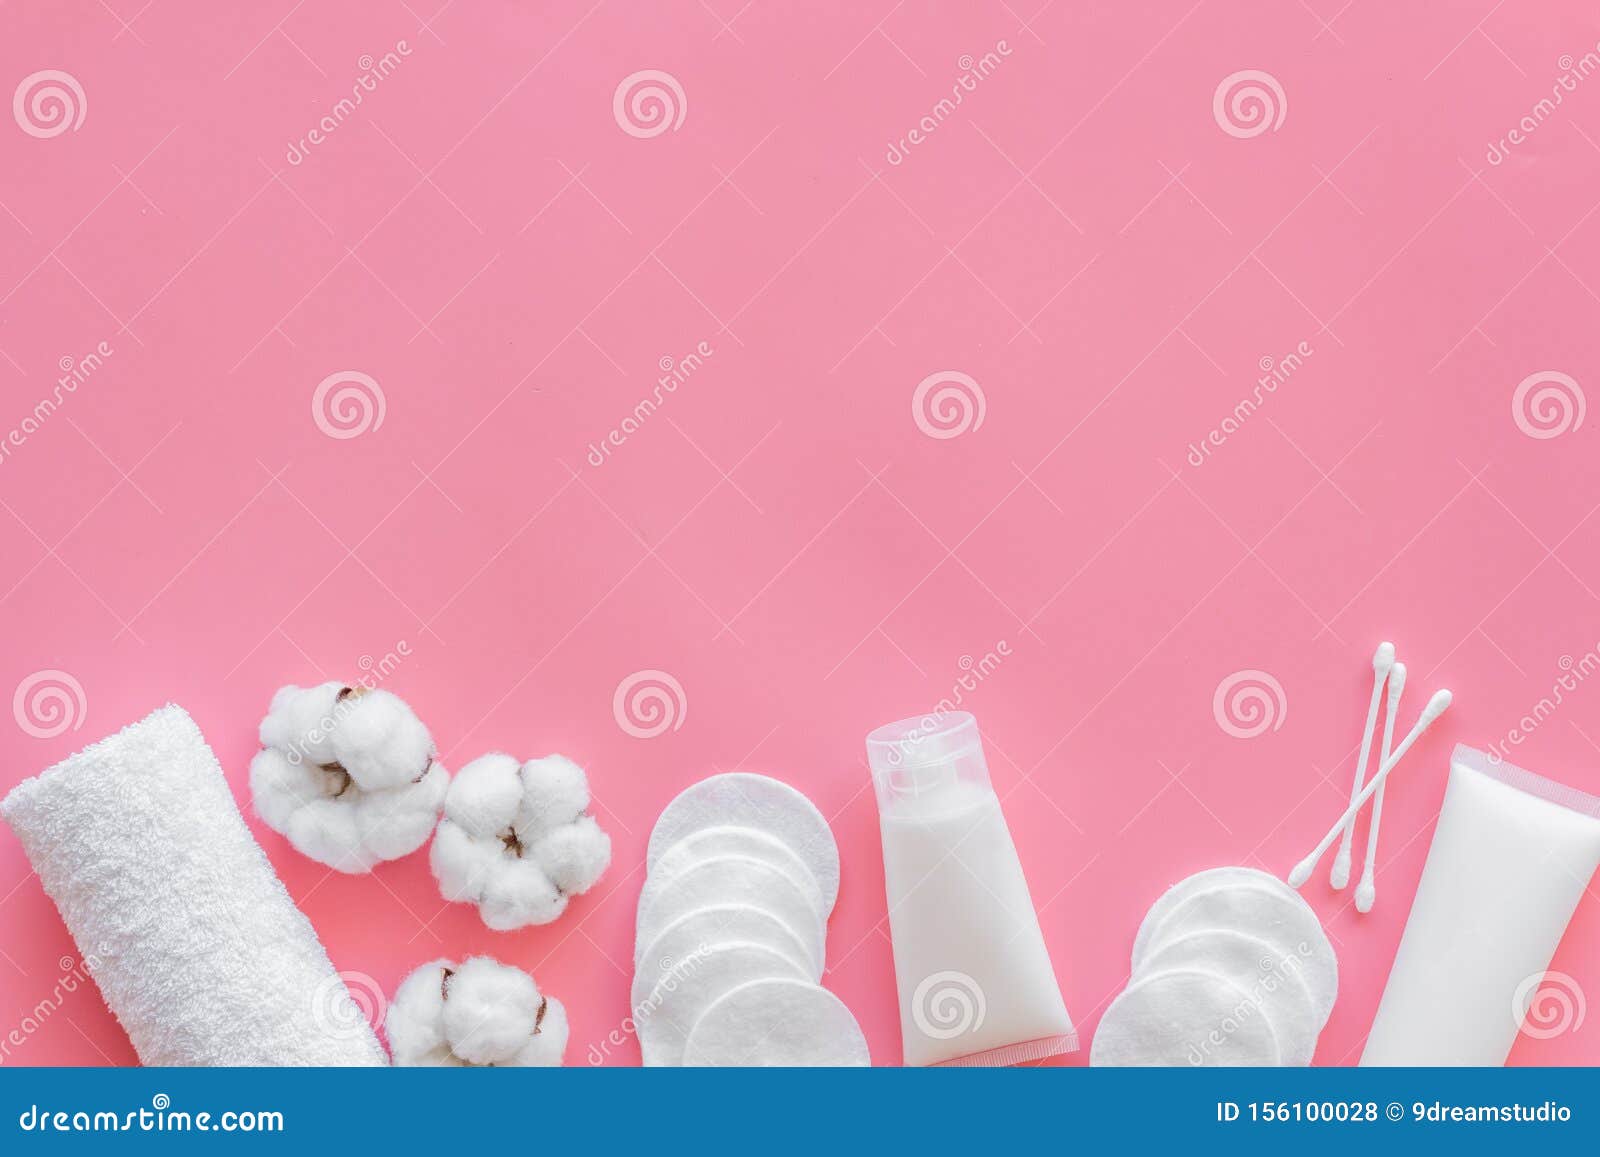 Download Hygiene Cotton Swabs, Pads And Cream For Pattern On Pink ...